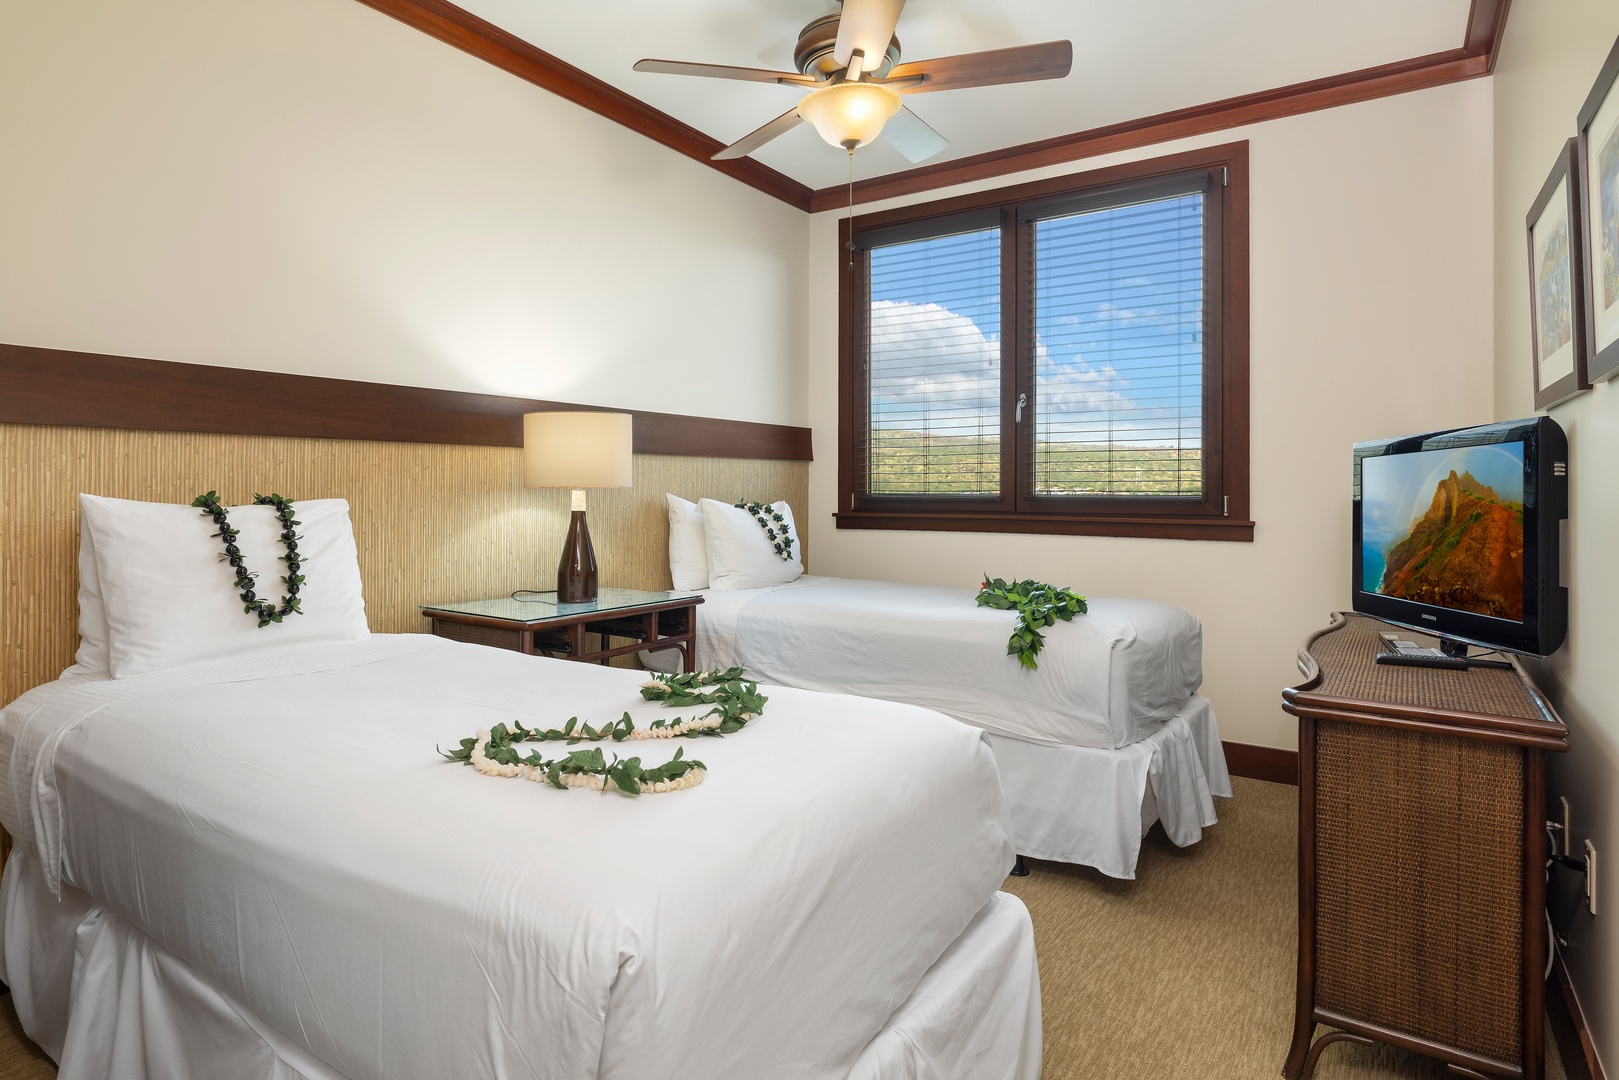 Kapolei Vacation Rentals, Ko Olina Beach Villas O1402 - The third guest bedroom has twin beds with scenic views and tropical decor.